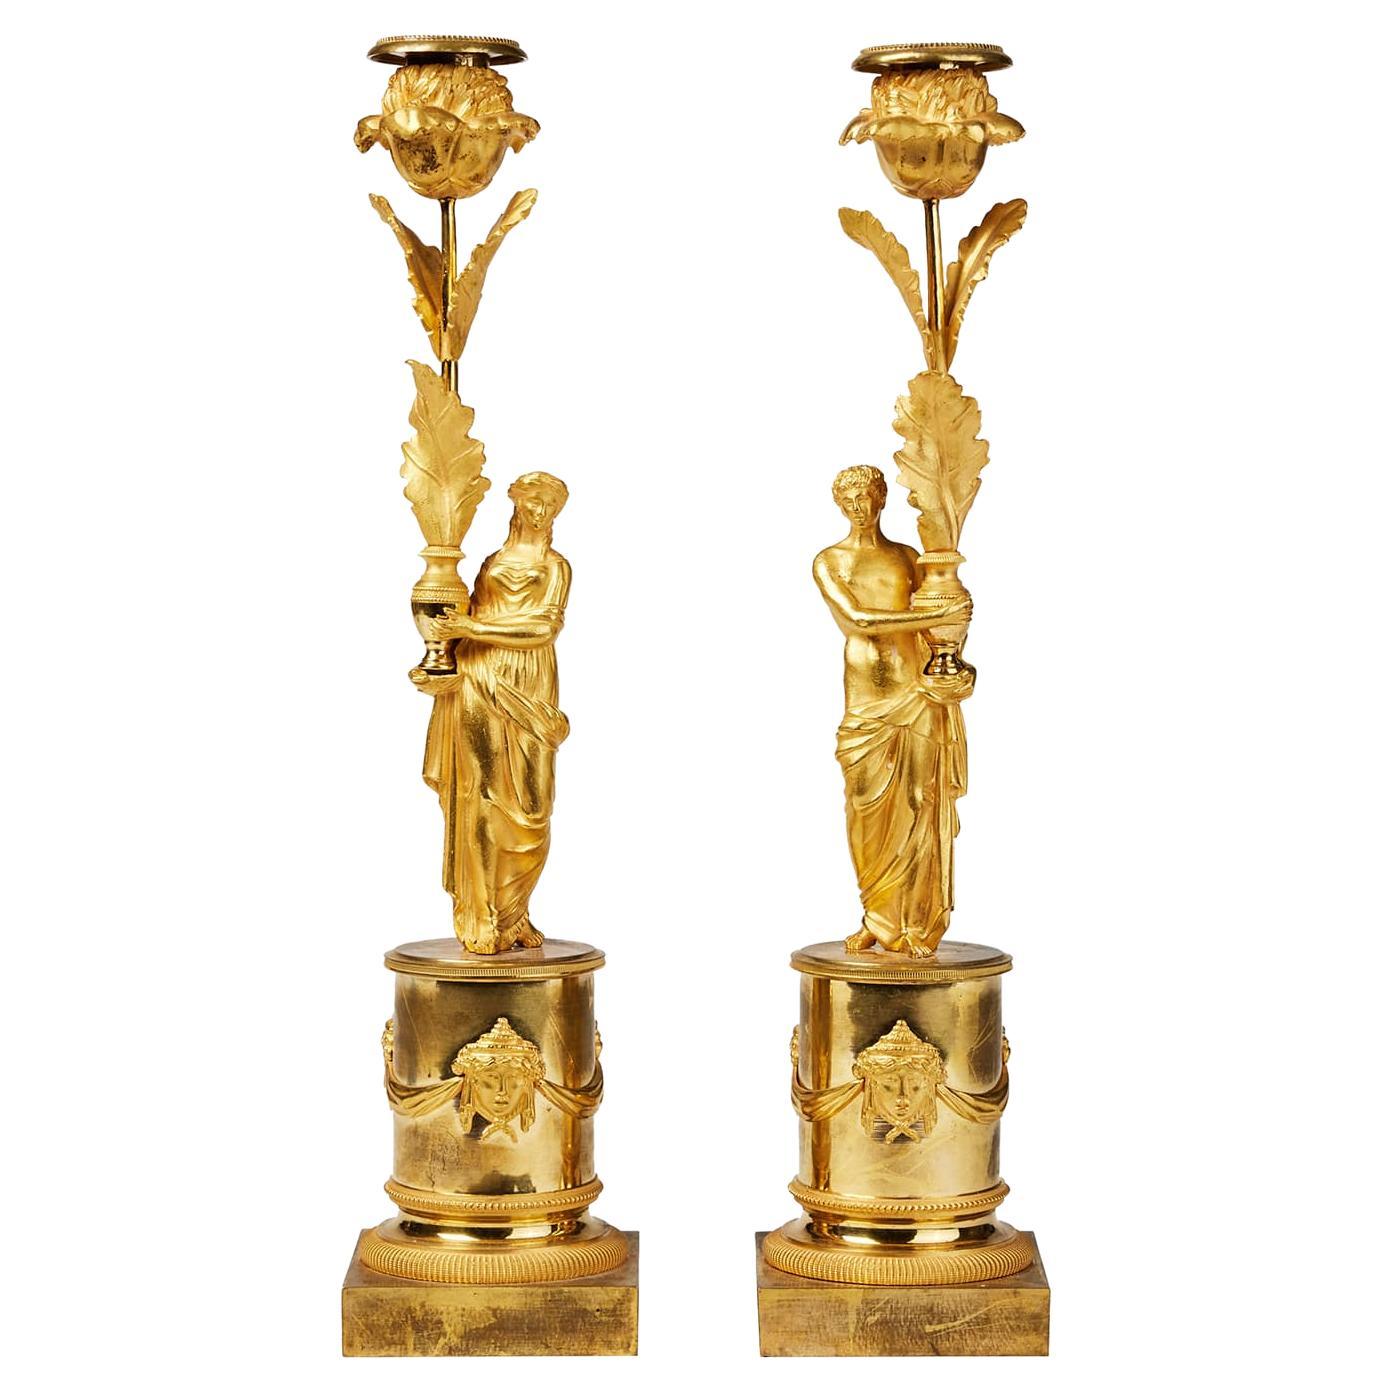 18th-19th Century French Empire Pair of Antique Gilded Bronze Candle Holders For Sale